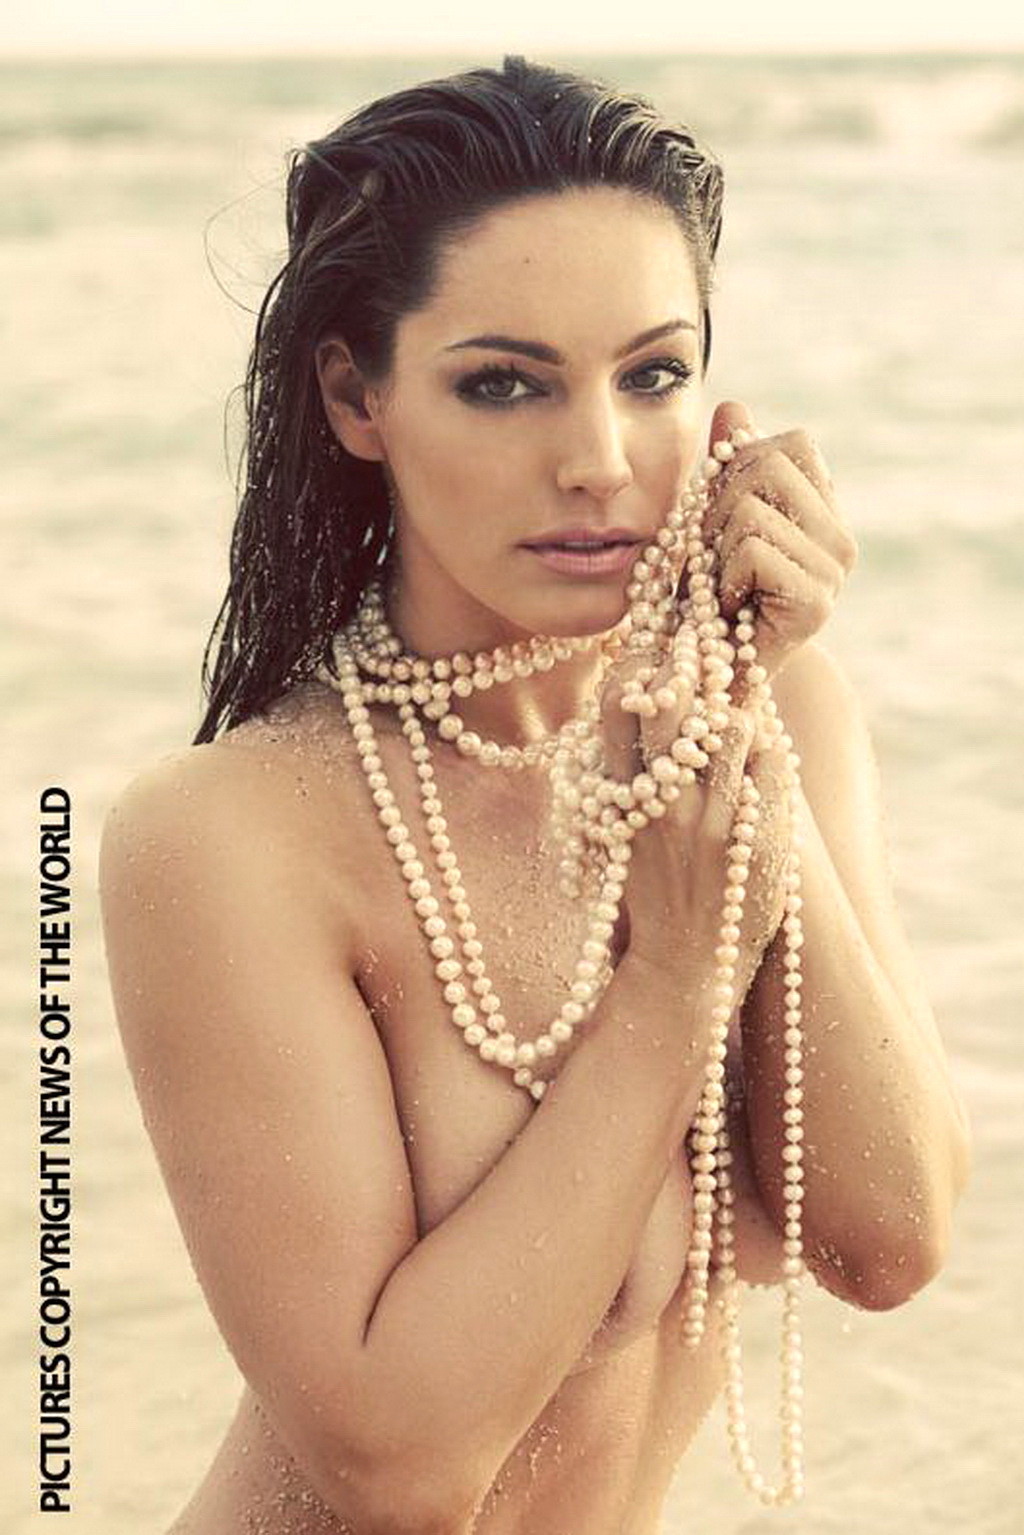 Kelly Brook nude showing off her big naturals in a beach photoshoot #75329337